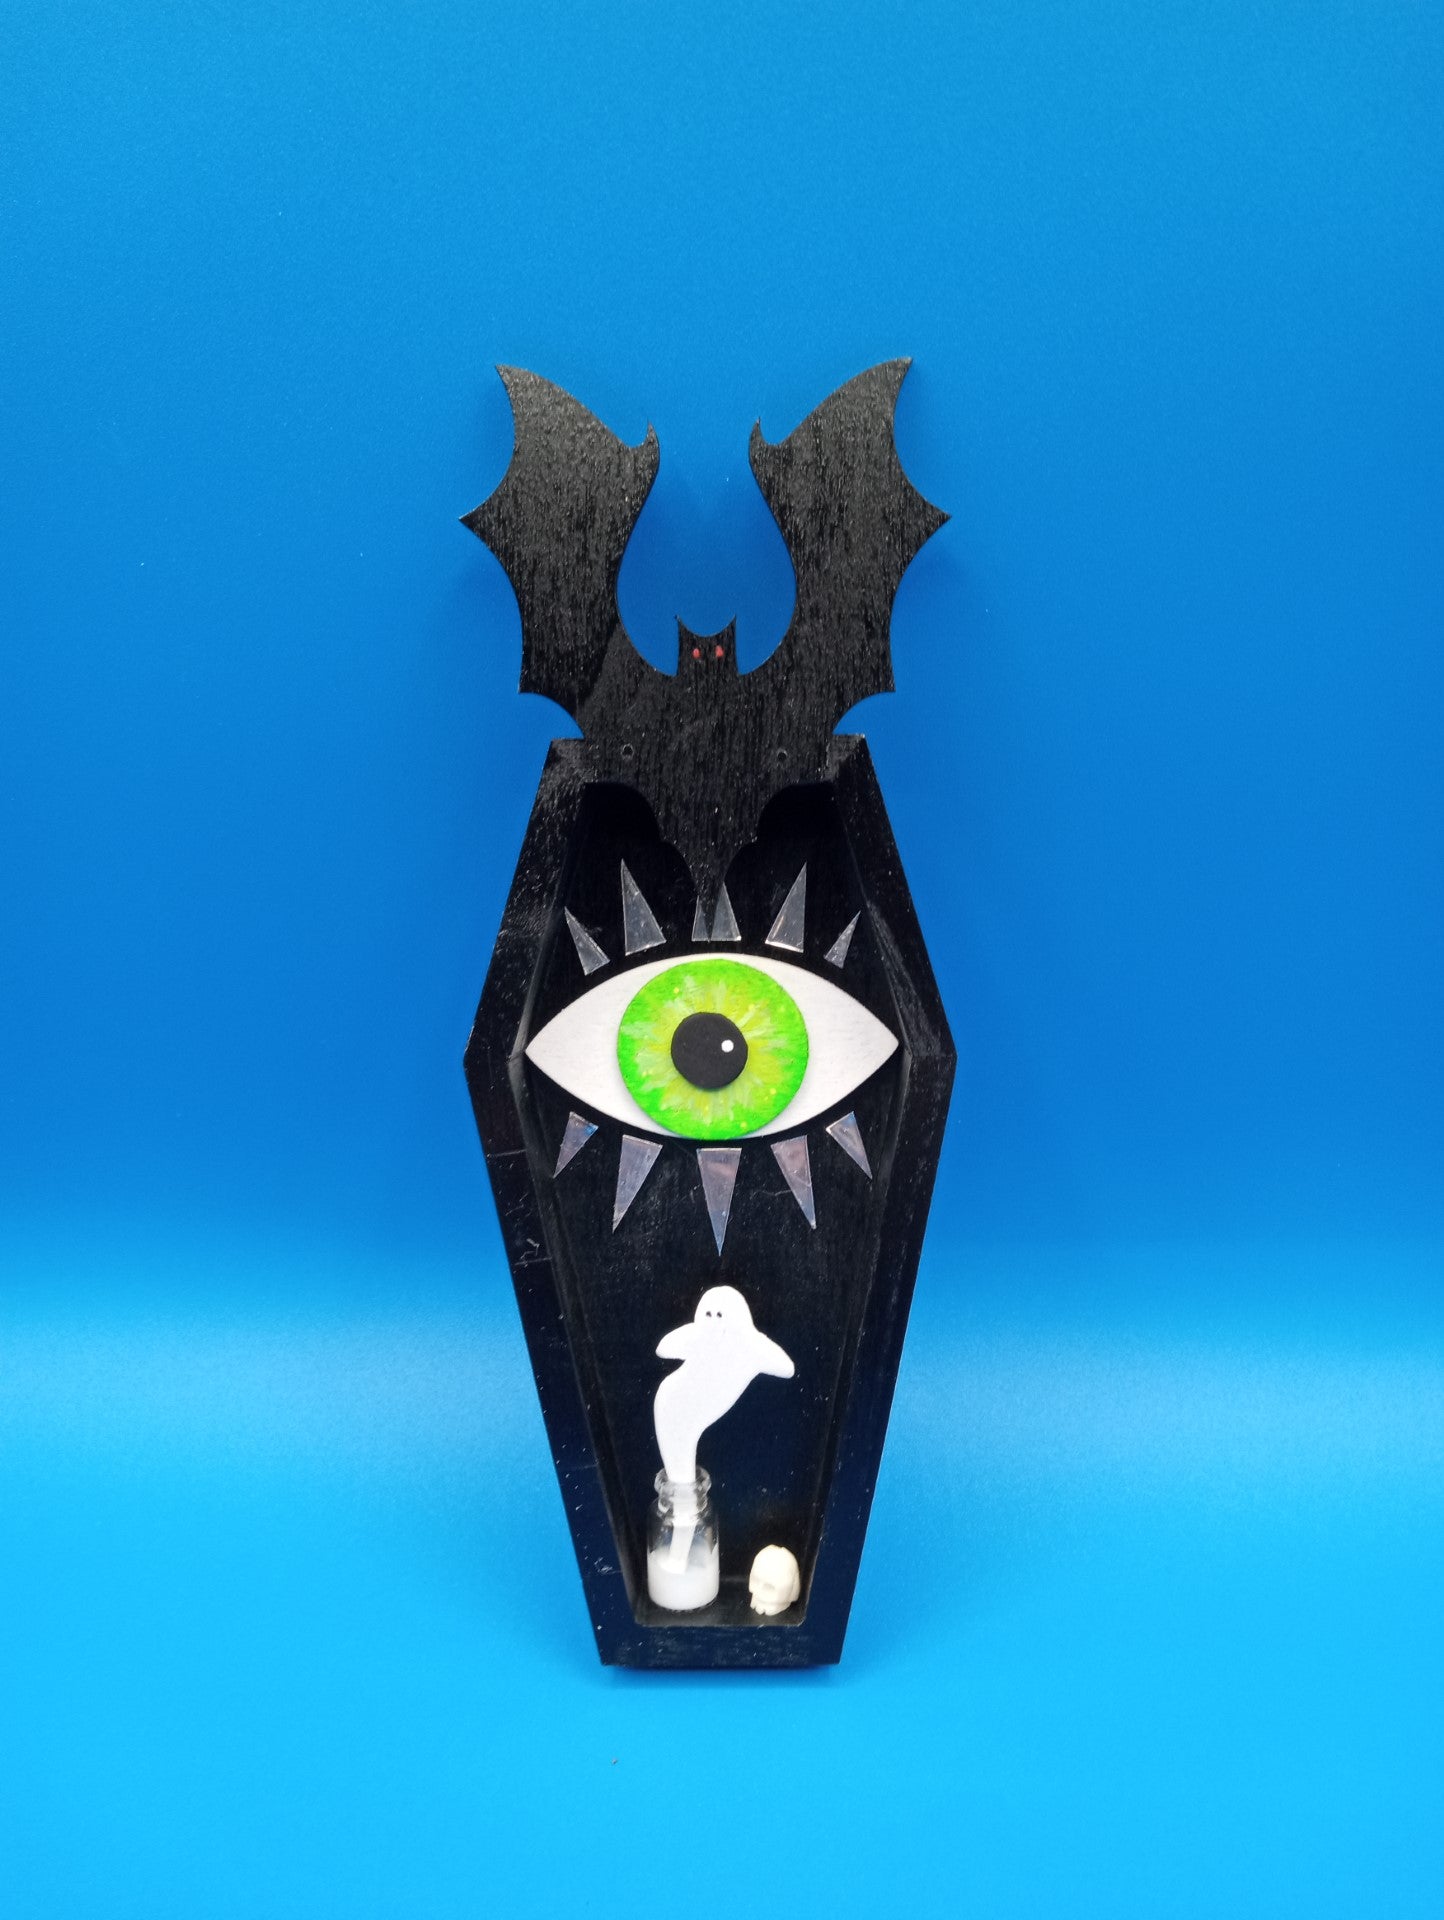 Hand painted wooden coffin figure with bat figure on the top  Large green eye peaking out of the coffin  Ghost coming out of a bottle and a small skull off to the side  Wire attached to the back for hanging